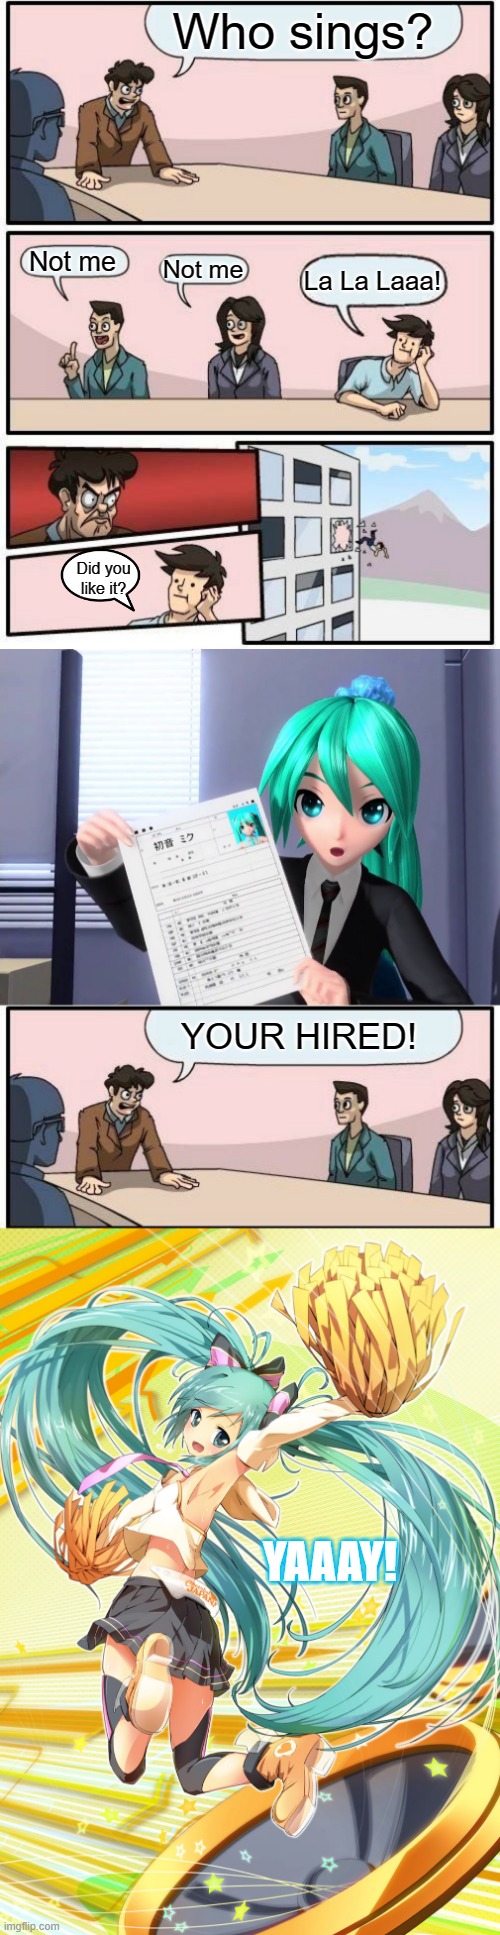 Hiring a singer | Who sings? Not me; Not me; La La Laaa! Did you like it? YOUR HIRED! YAAAY! | image tagged in memes,boardroom meeting suggestion,hatsune miku,singer | made w/ Imgflip meme maker